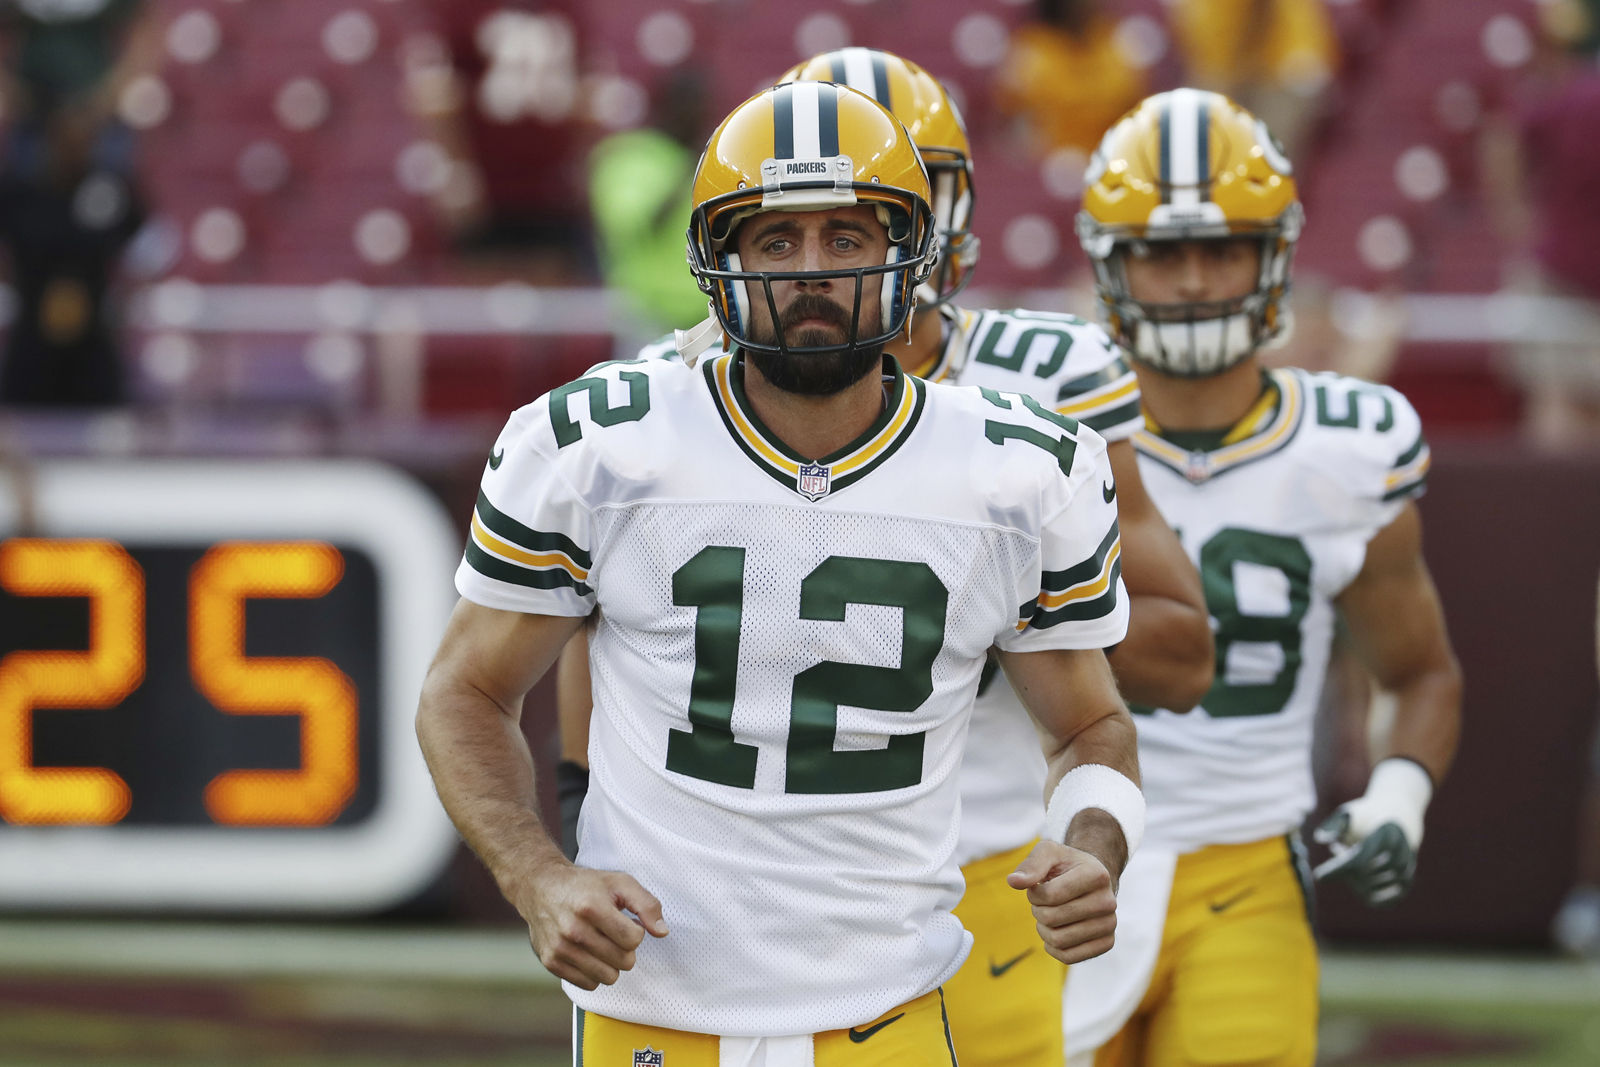 Green Bay Packers quarterback Aaron Rodgers (12) runs out onto the field before an NFL preseason football game against the Washington Redskins in Landover, Md., Saturday, Aug. 19, 2017. (AP Photo/Alex Brandon)